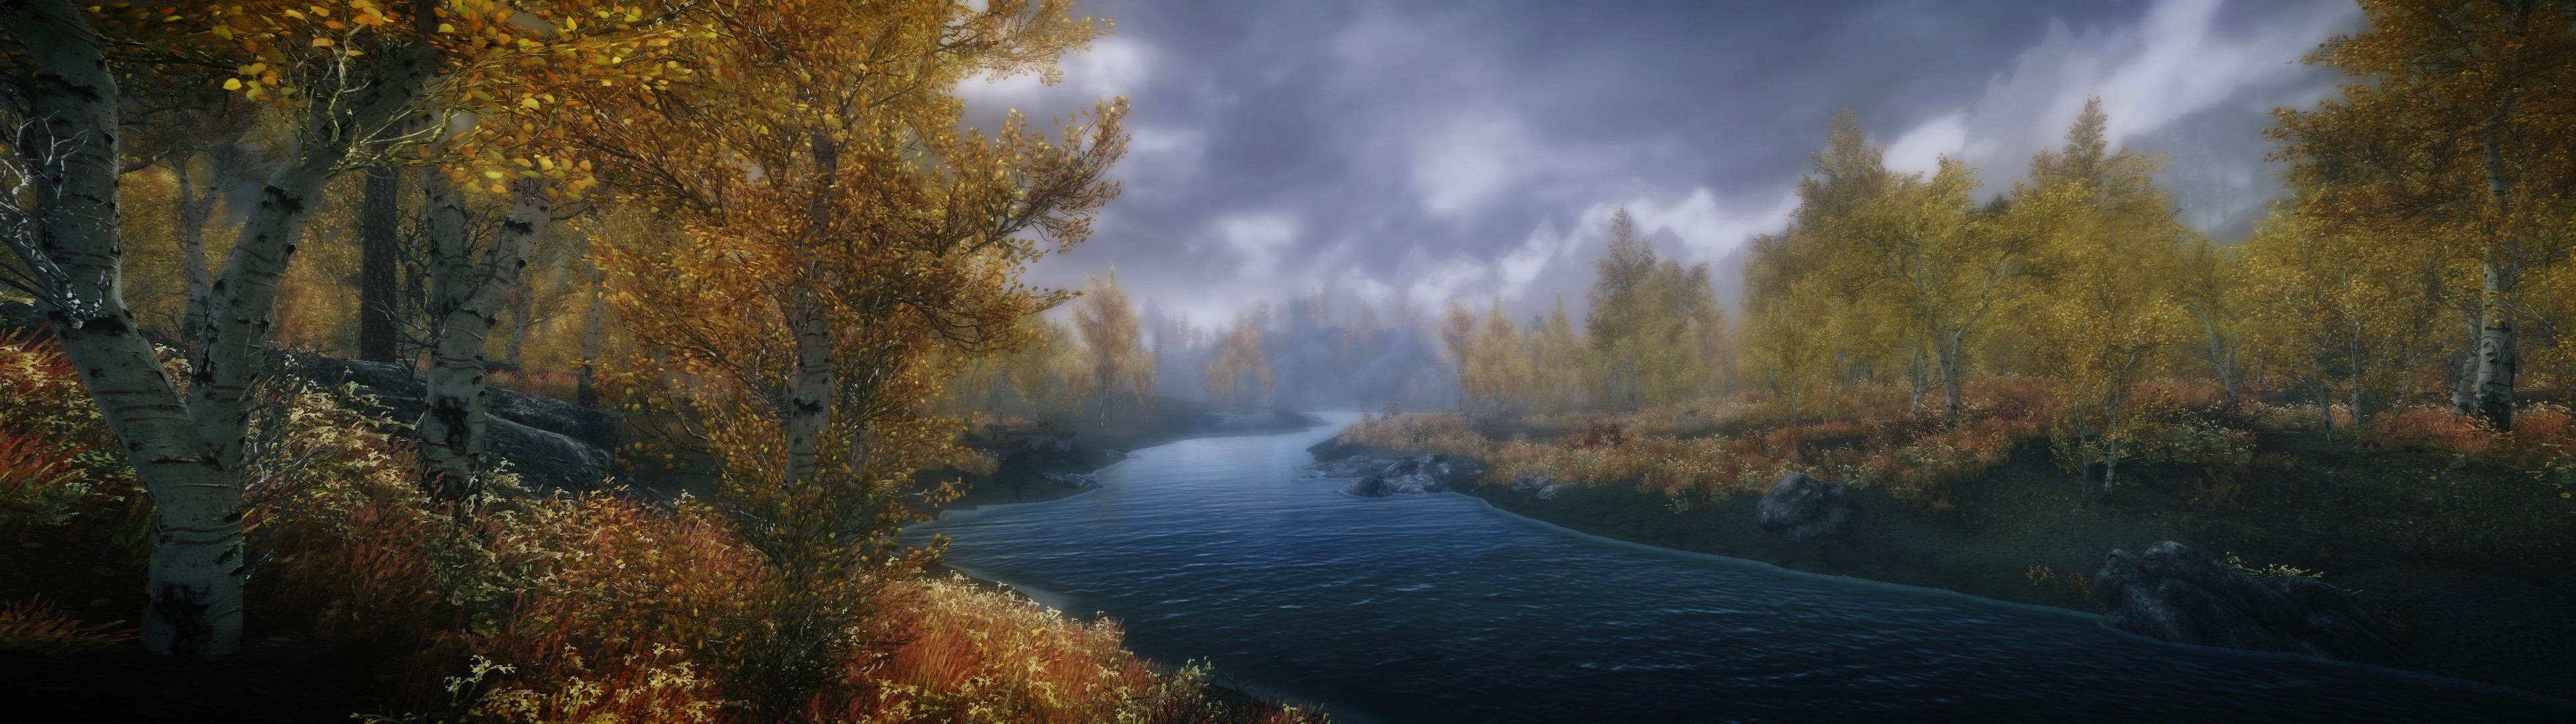 skyrim special edition 1.9.32.0.8 patch download